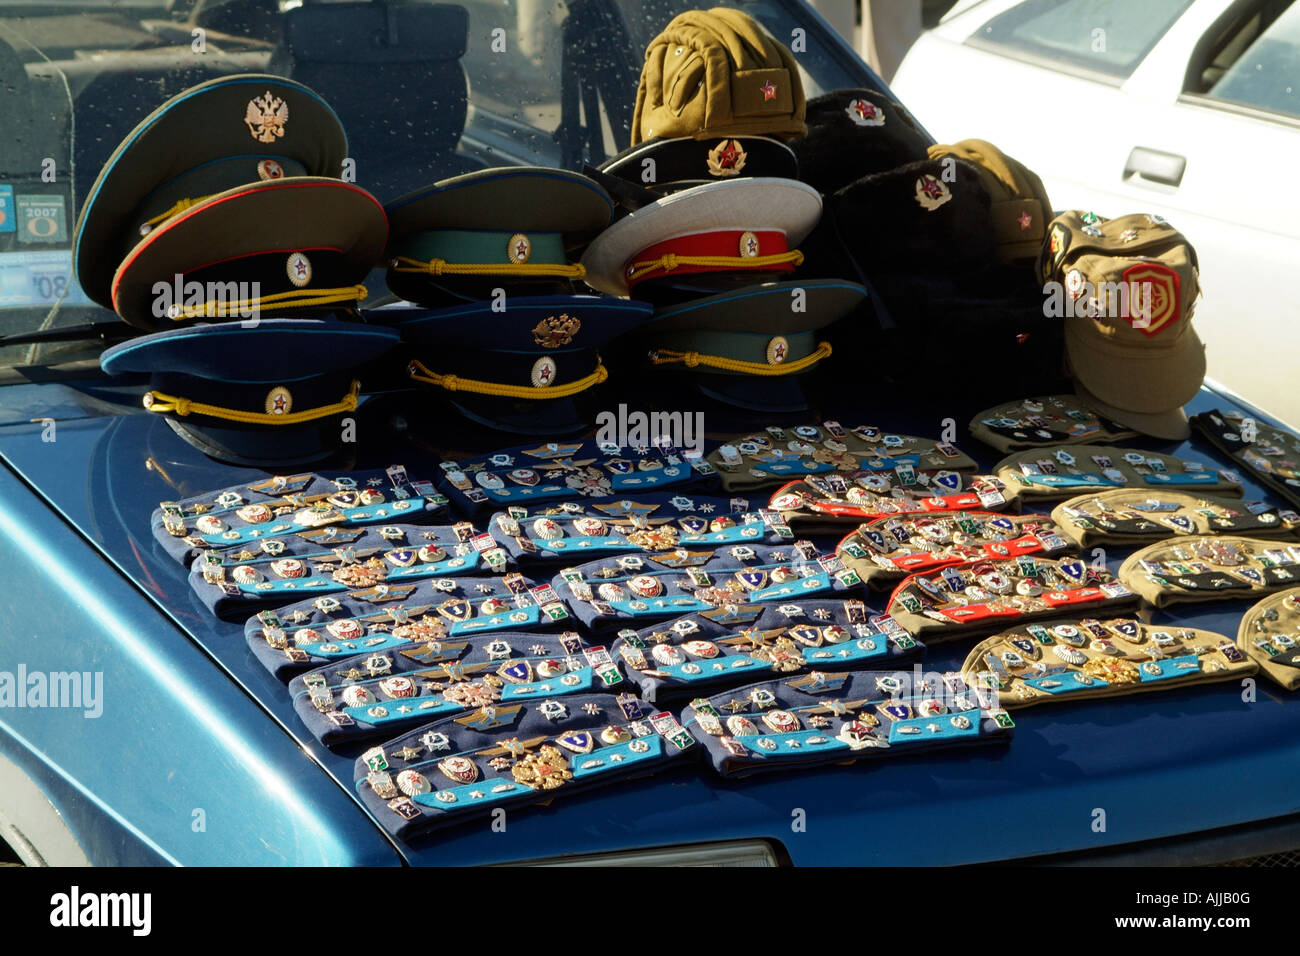 Russian Military Hats Caps and Badges for Sale from the bonnet of a car in  St Petersburg tourists area Stock Photo - Alamy